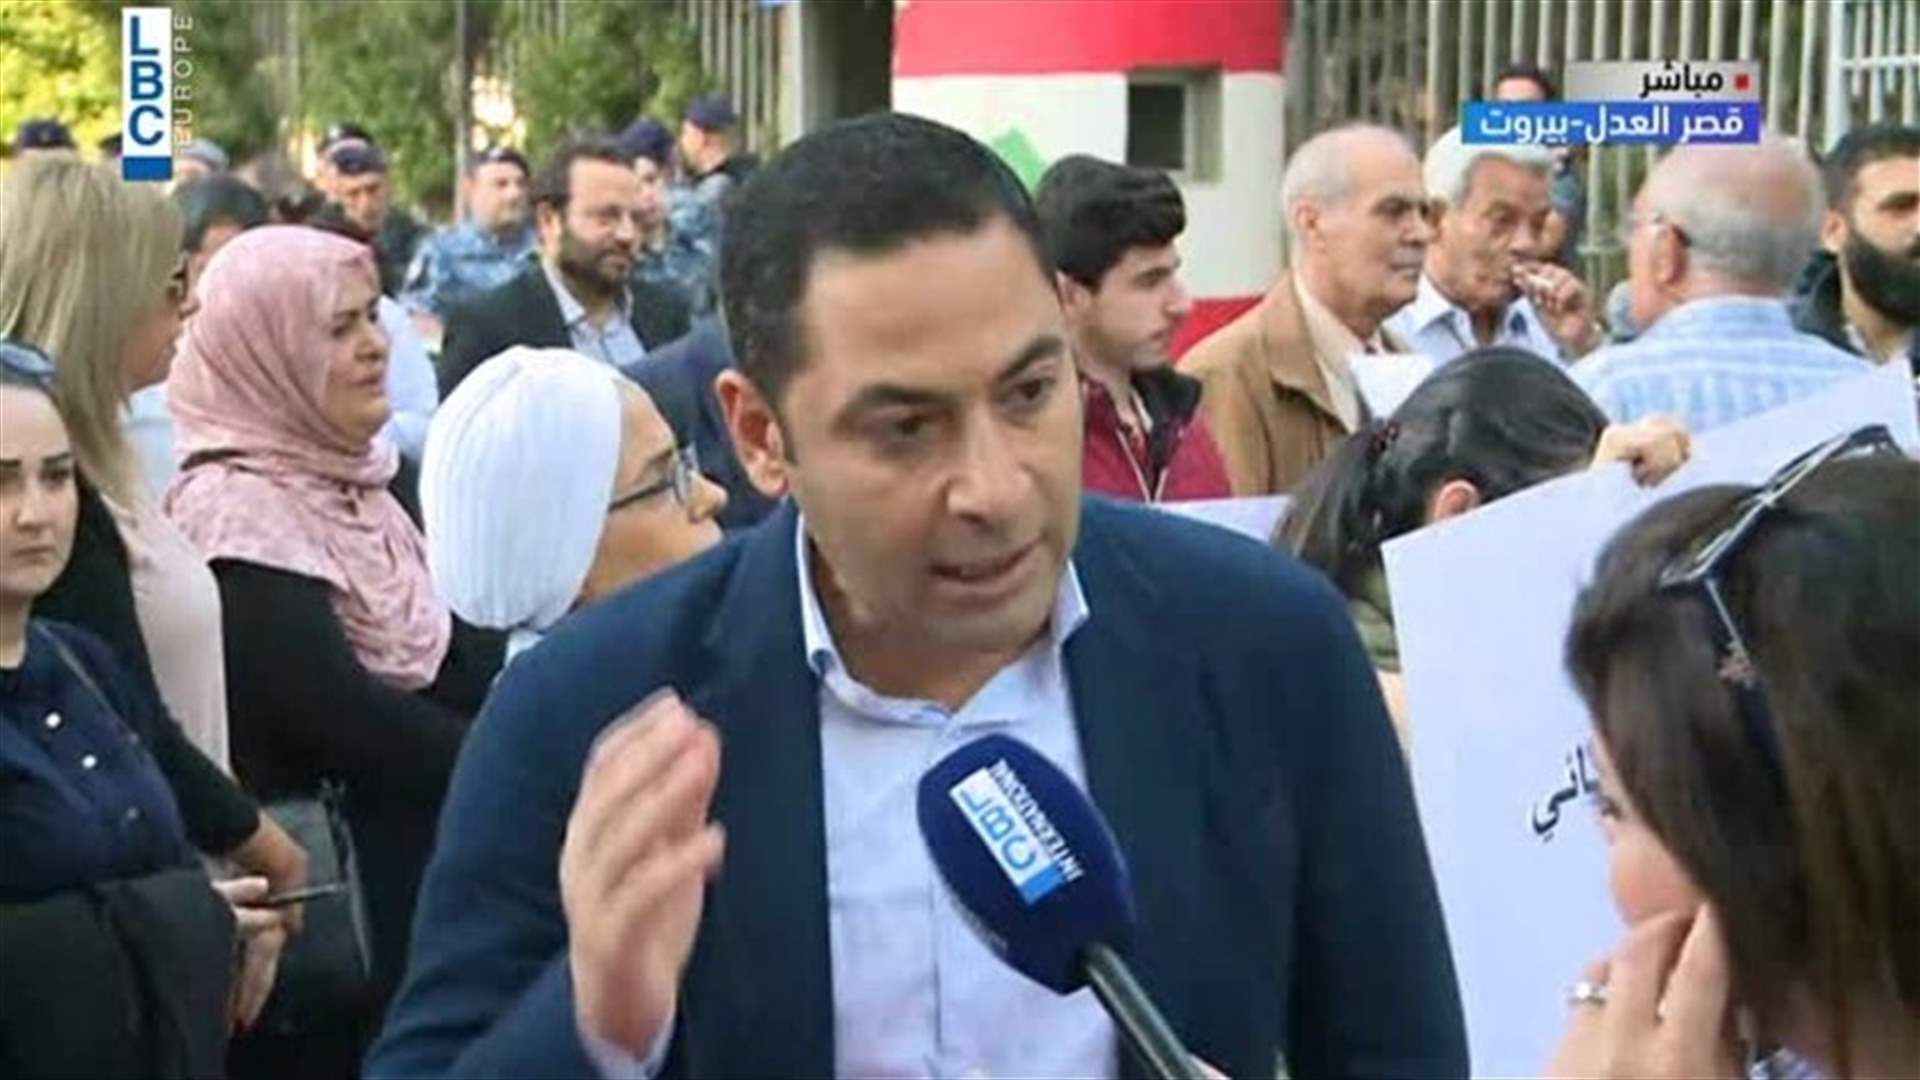 Protesters stage sit-in outside Beirut Justice Palace-[VIDEO]